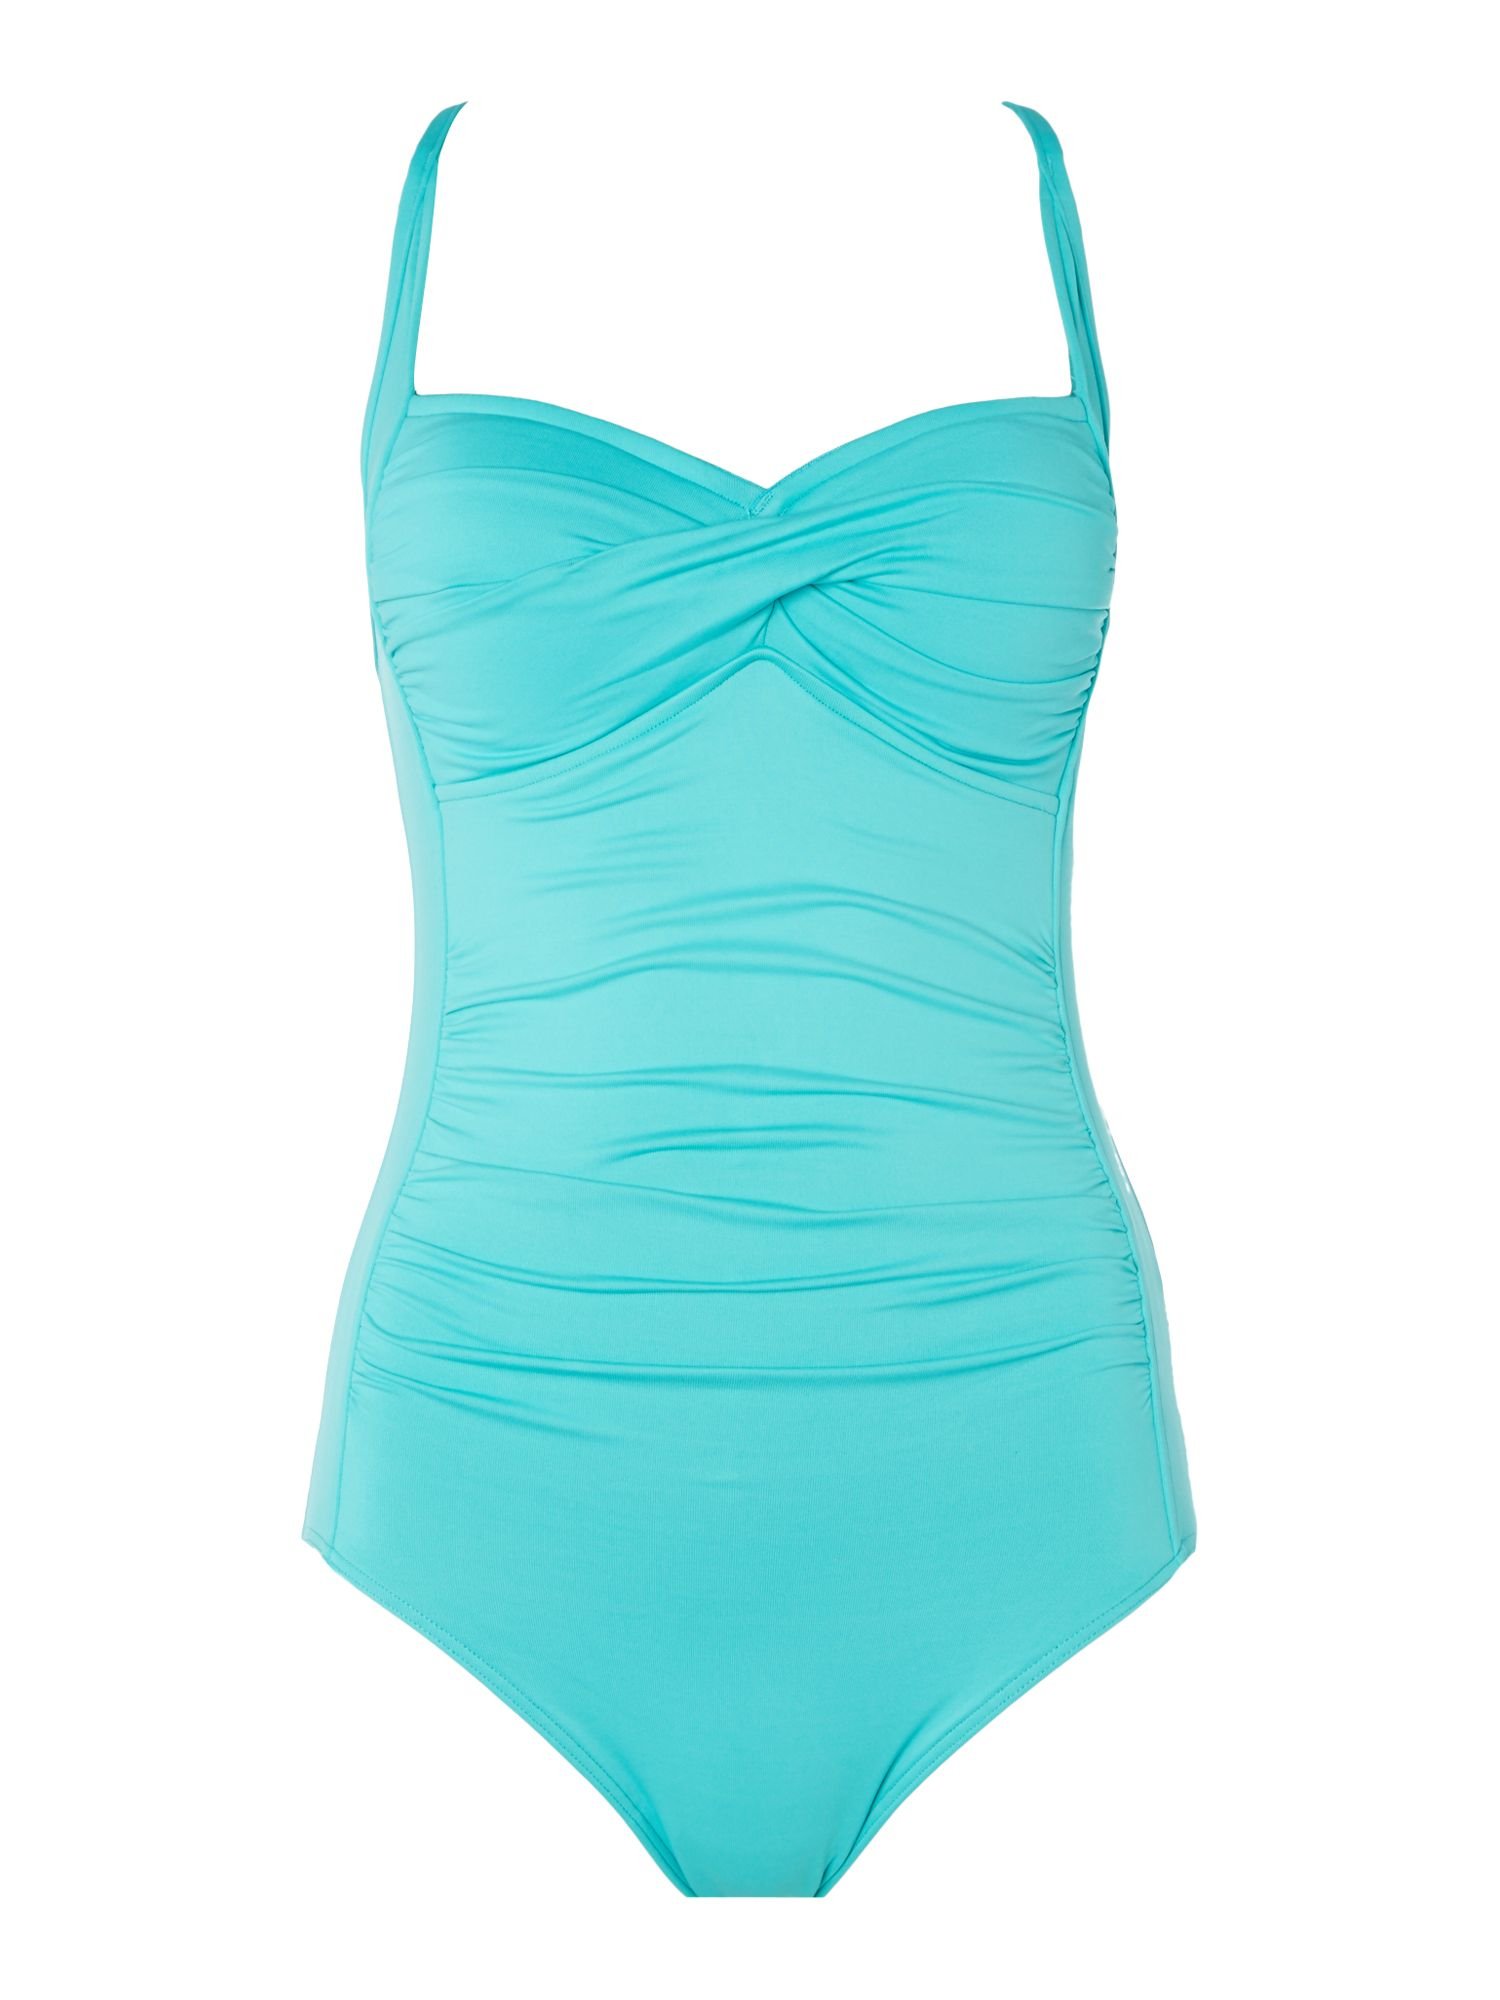 Seafolly Goddess Twist Halter Maillot Swimsuit in Teal (Green) | Lyst